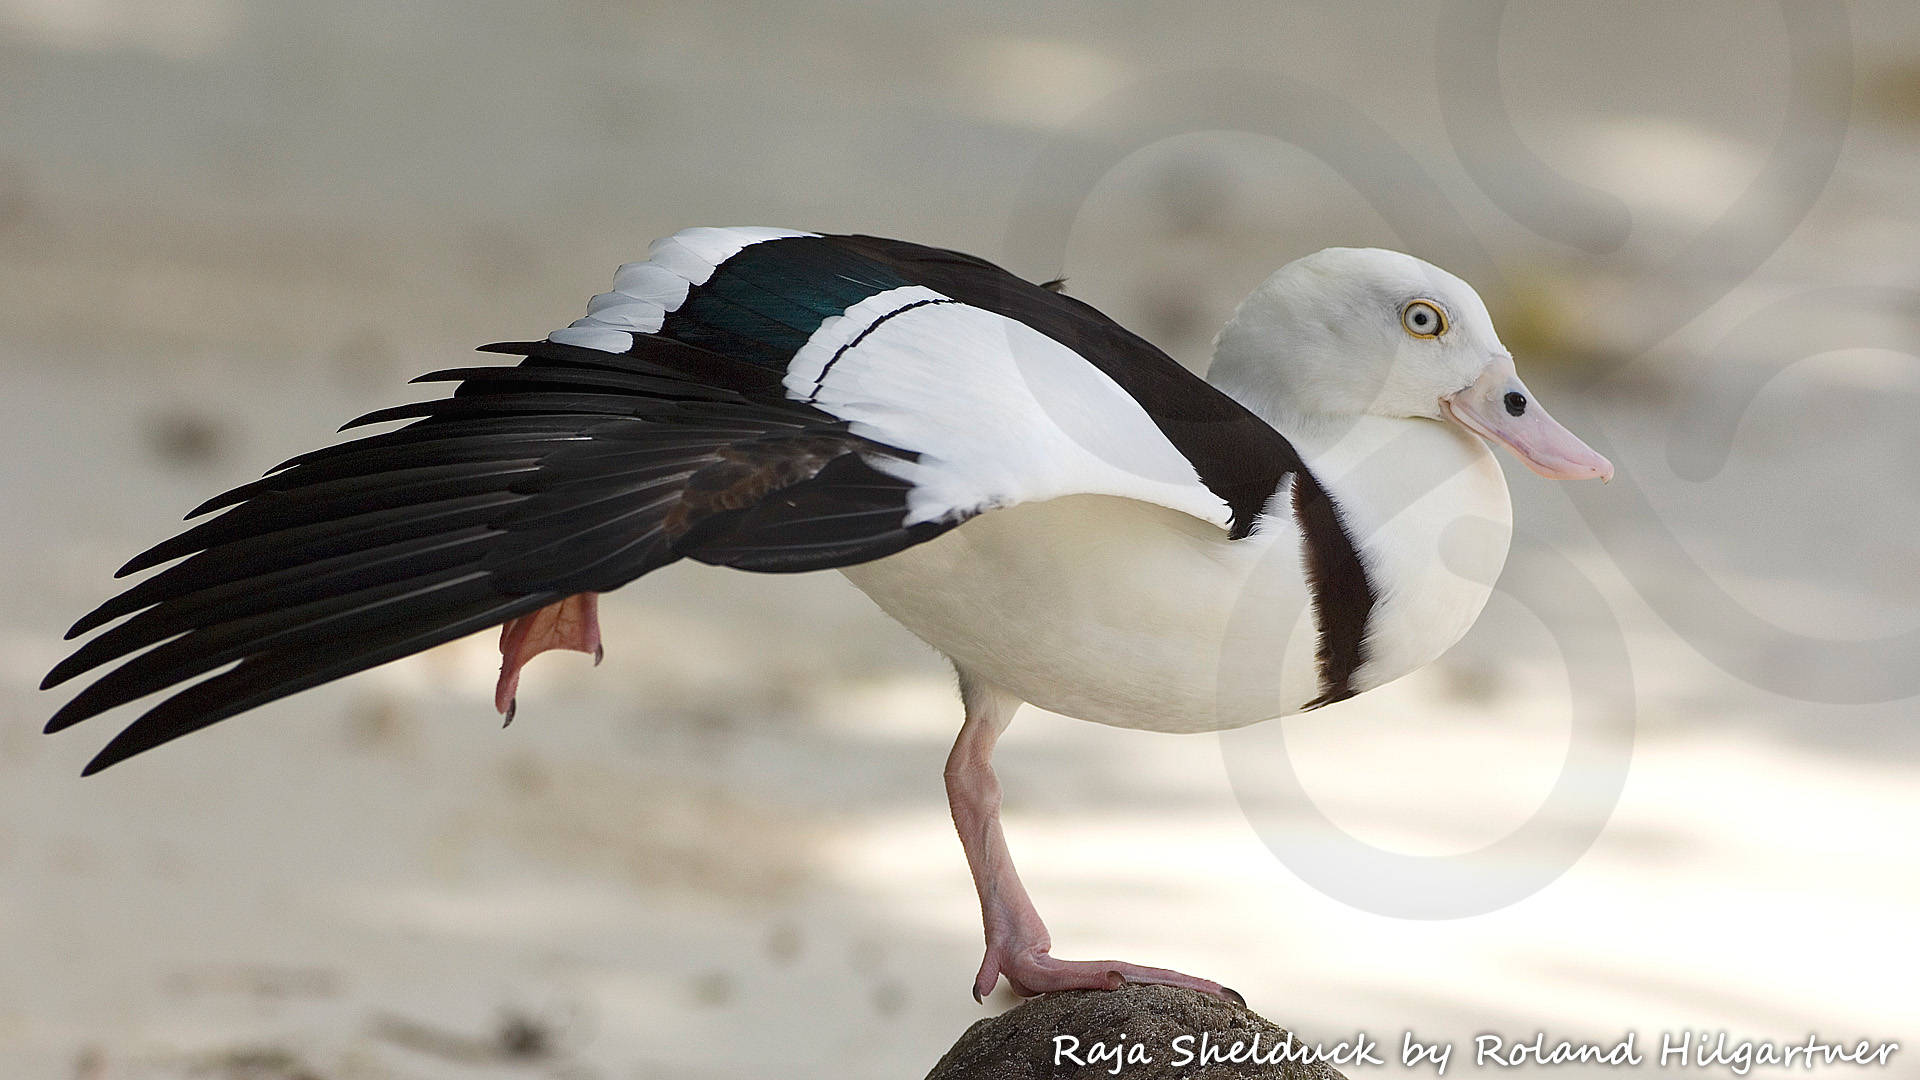 The Trans-Fly zone is a globally significant staging and wintering ground for waterfowl from Australia alongside locally resident species such as the Radjah Shelduck Radjah radjah. Copyright © Roland Hilgartner